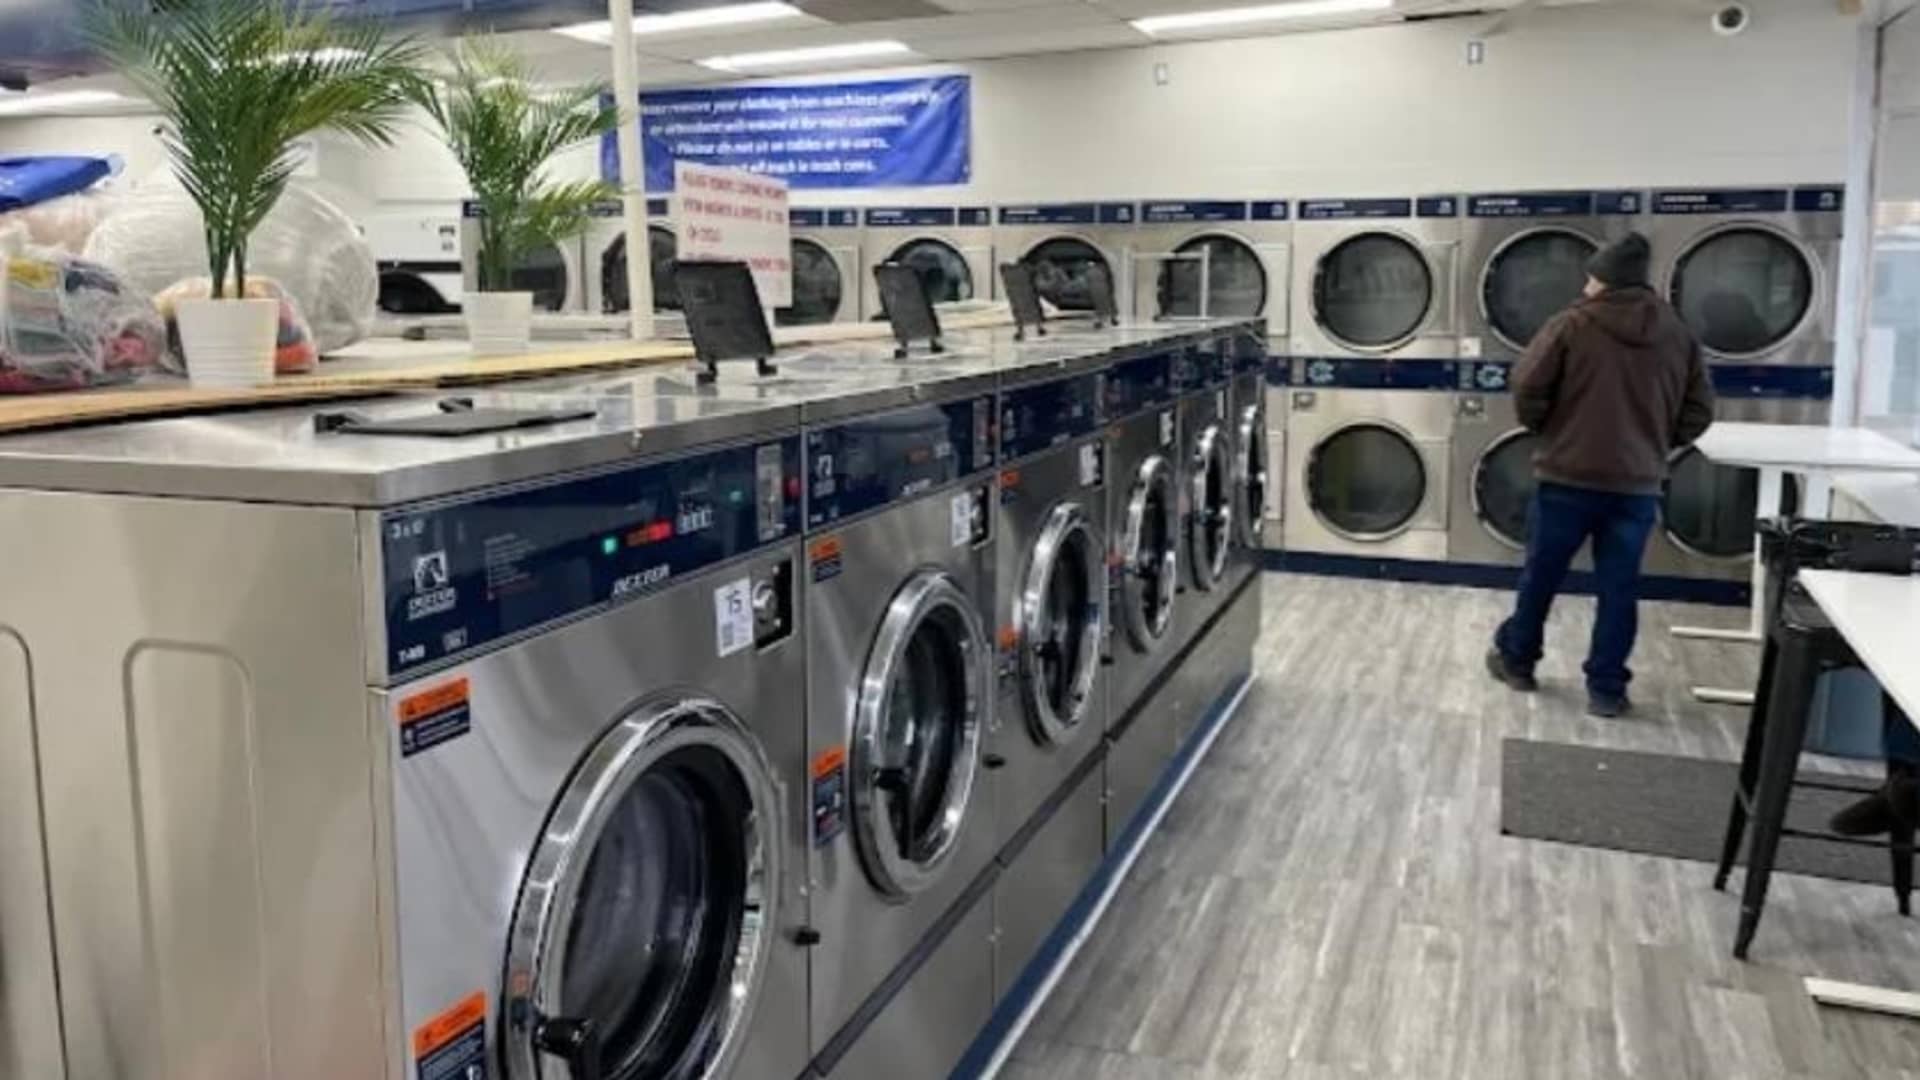 Sanya opened the Laundry Room, which has 40 machines, in September 2022.